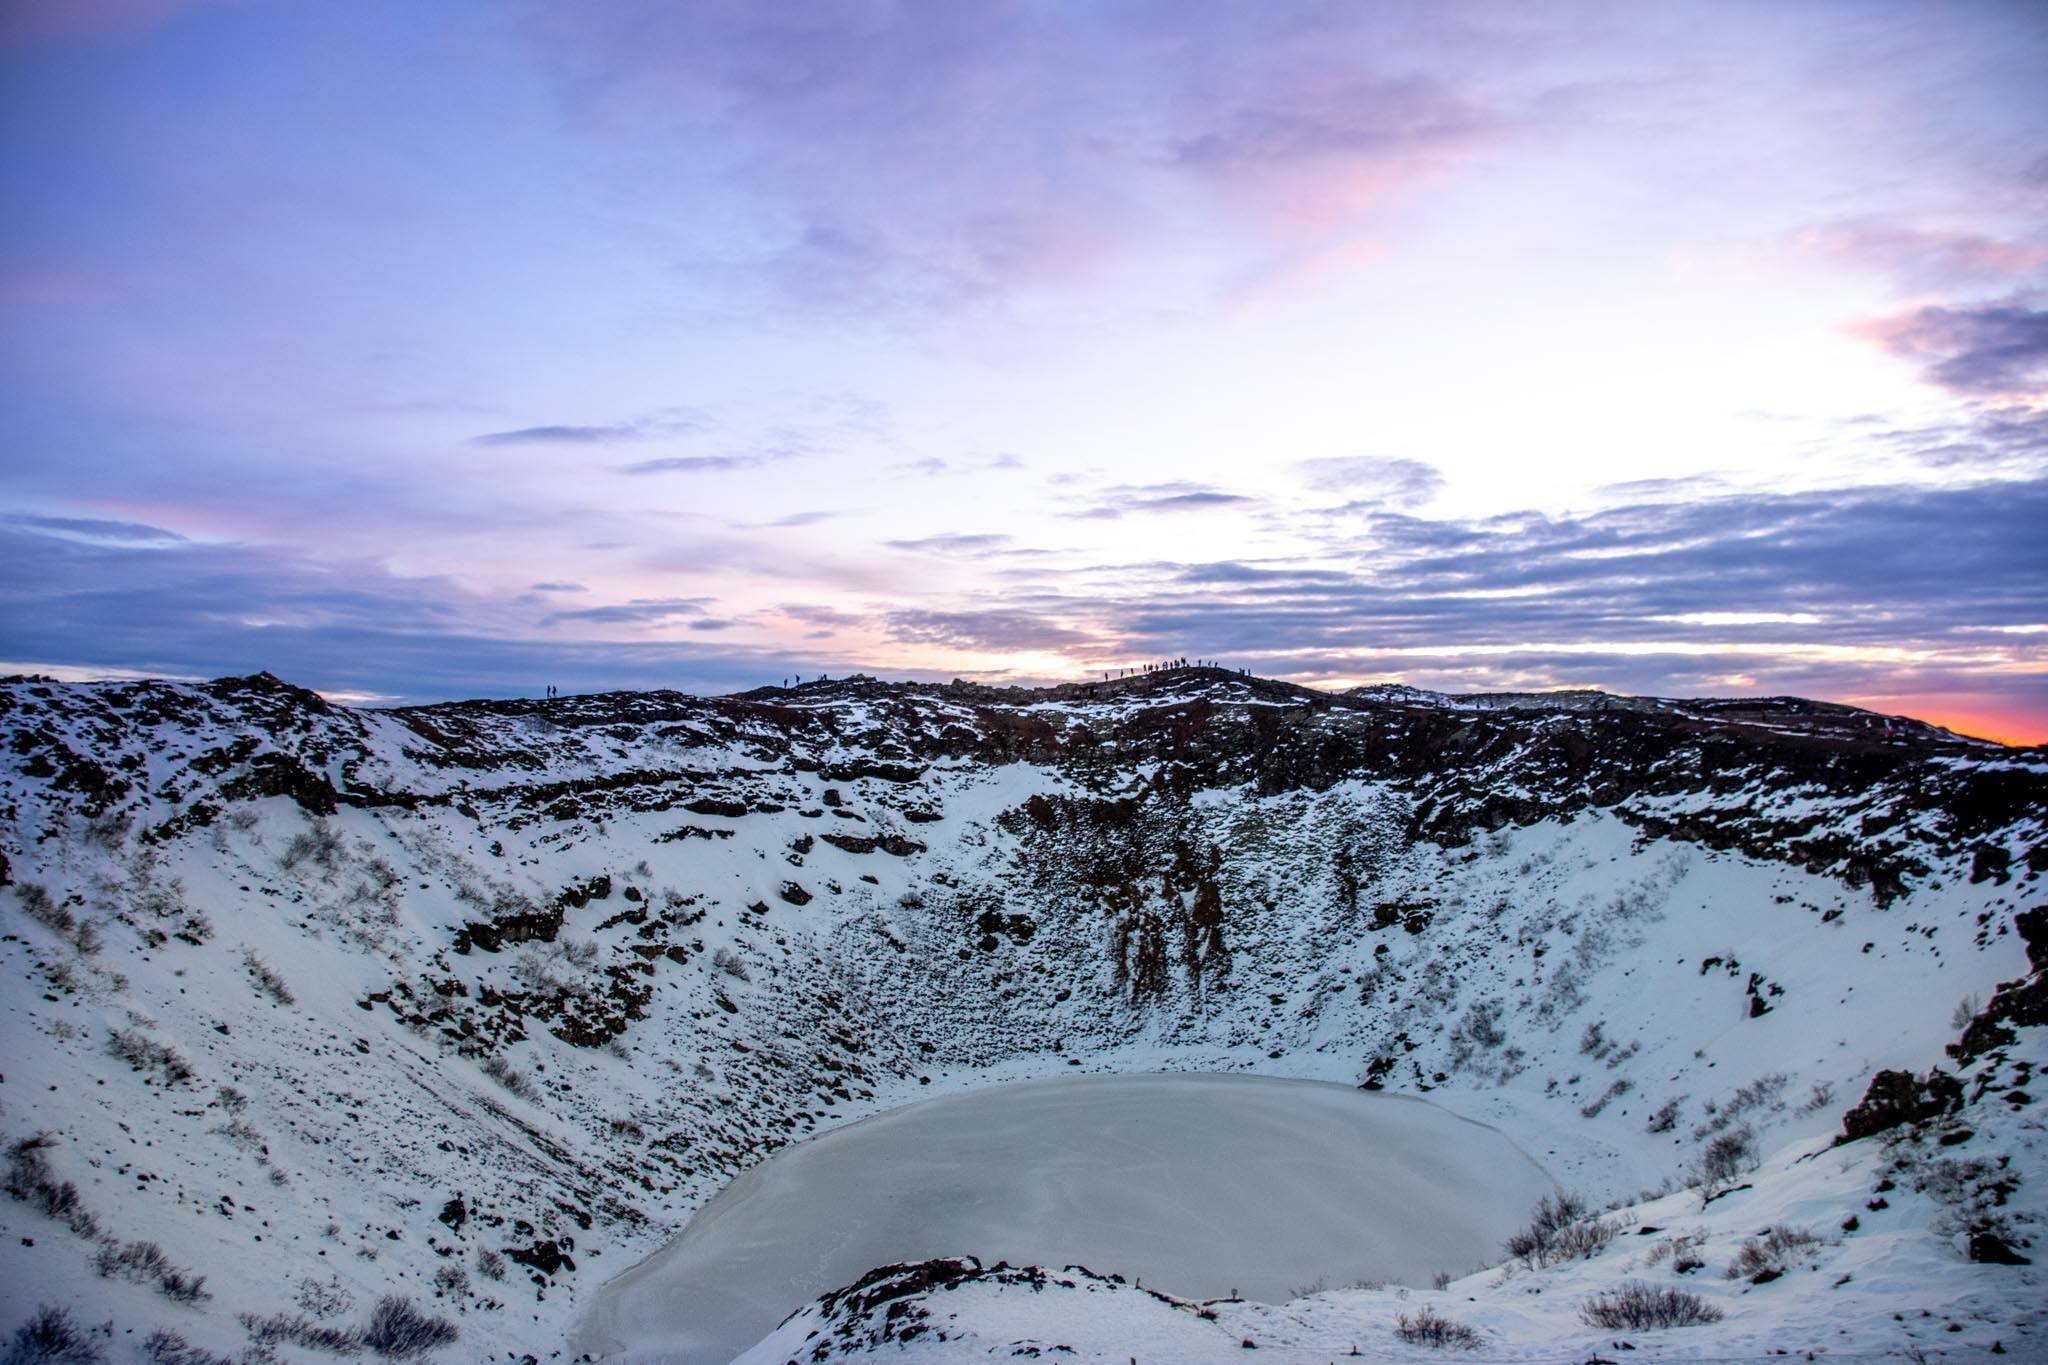 Crater and lake in the snow with purple sunset